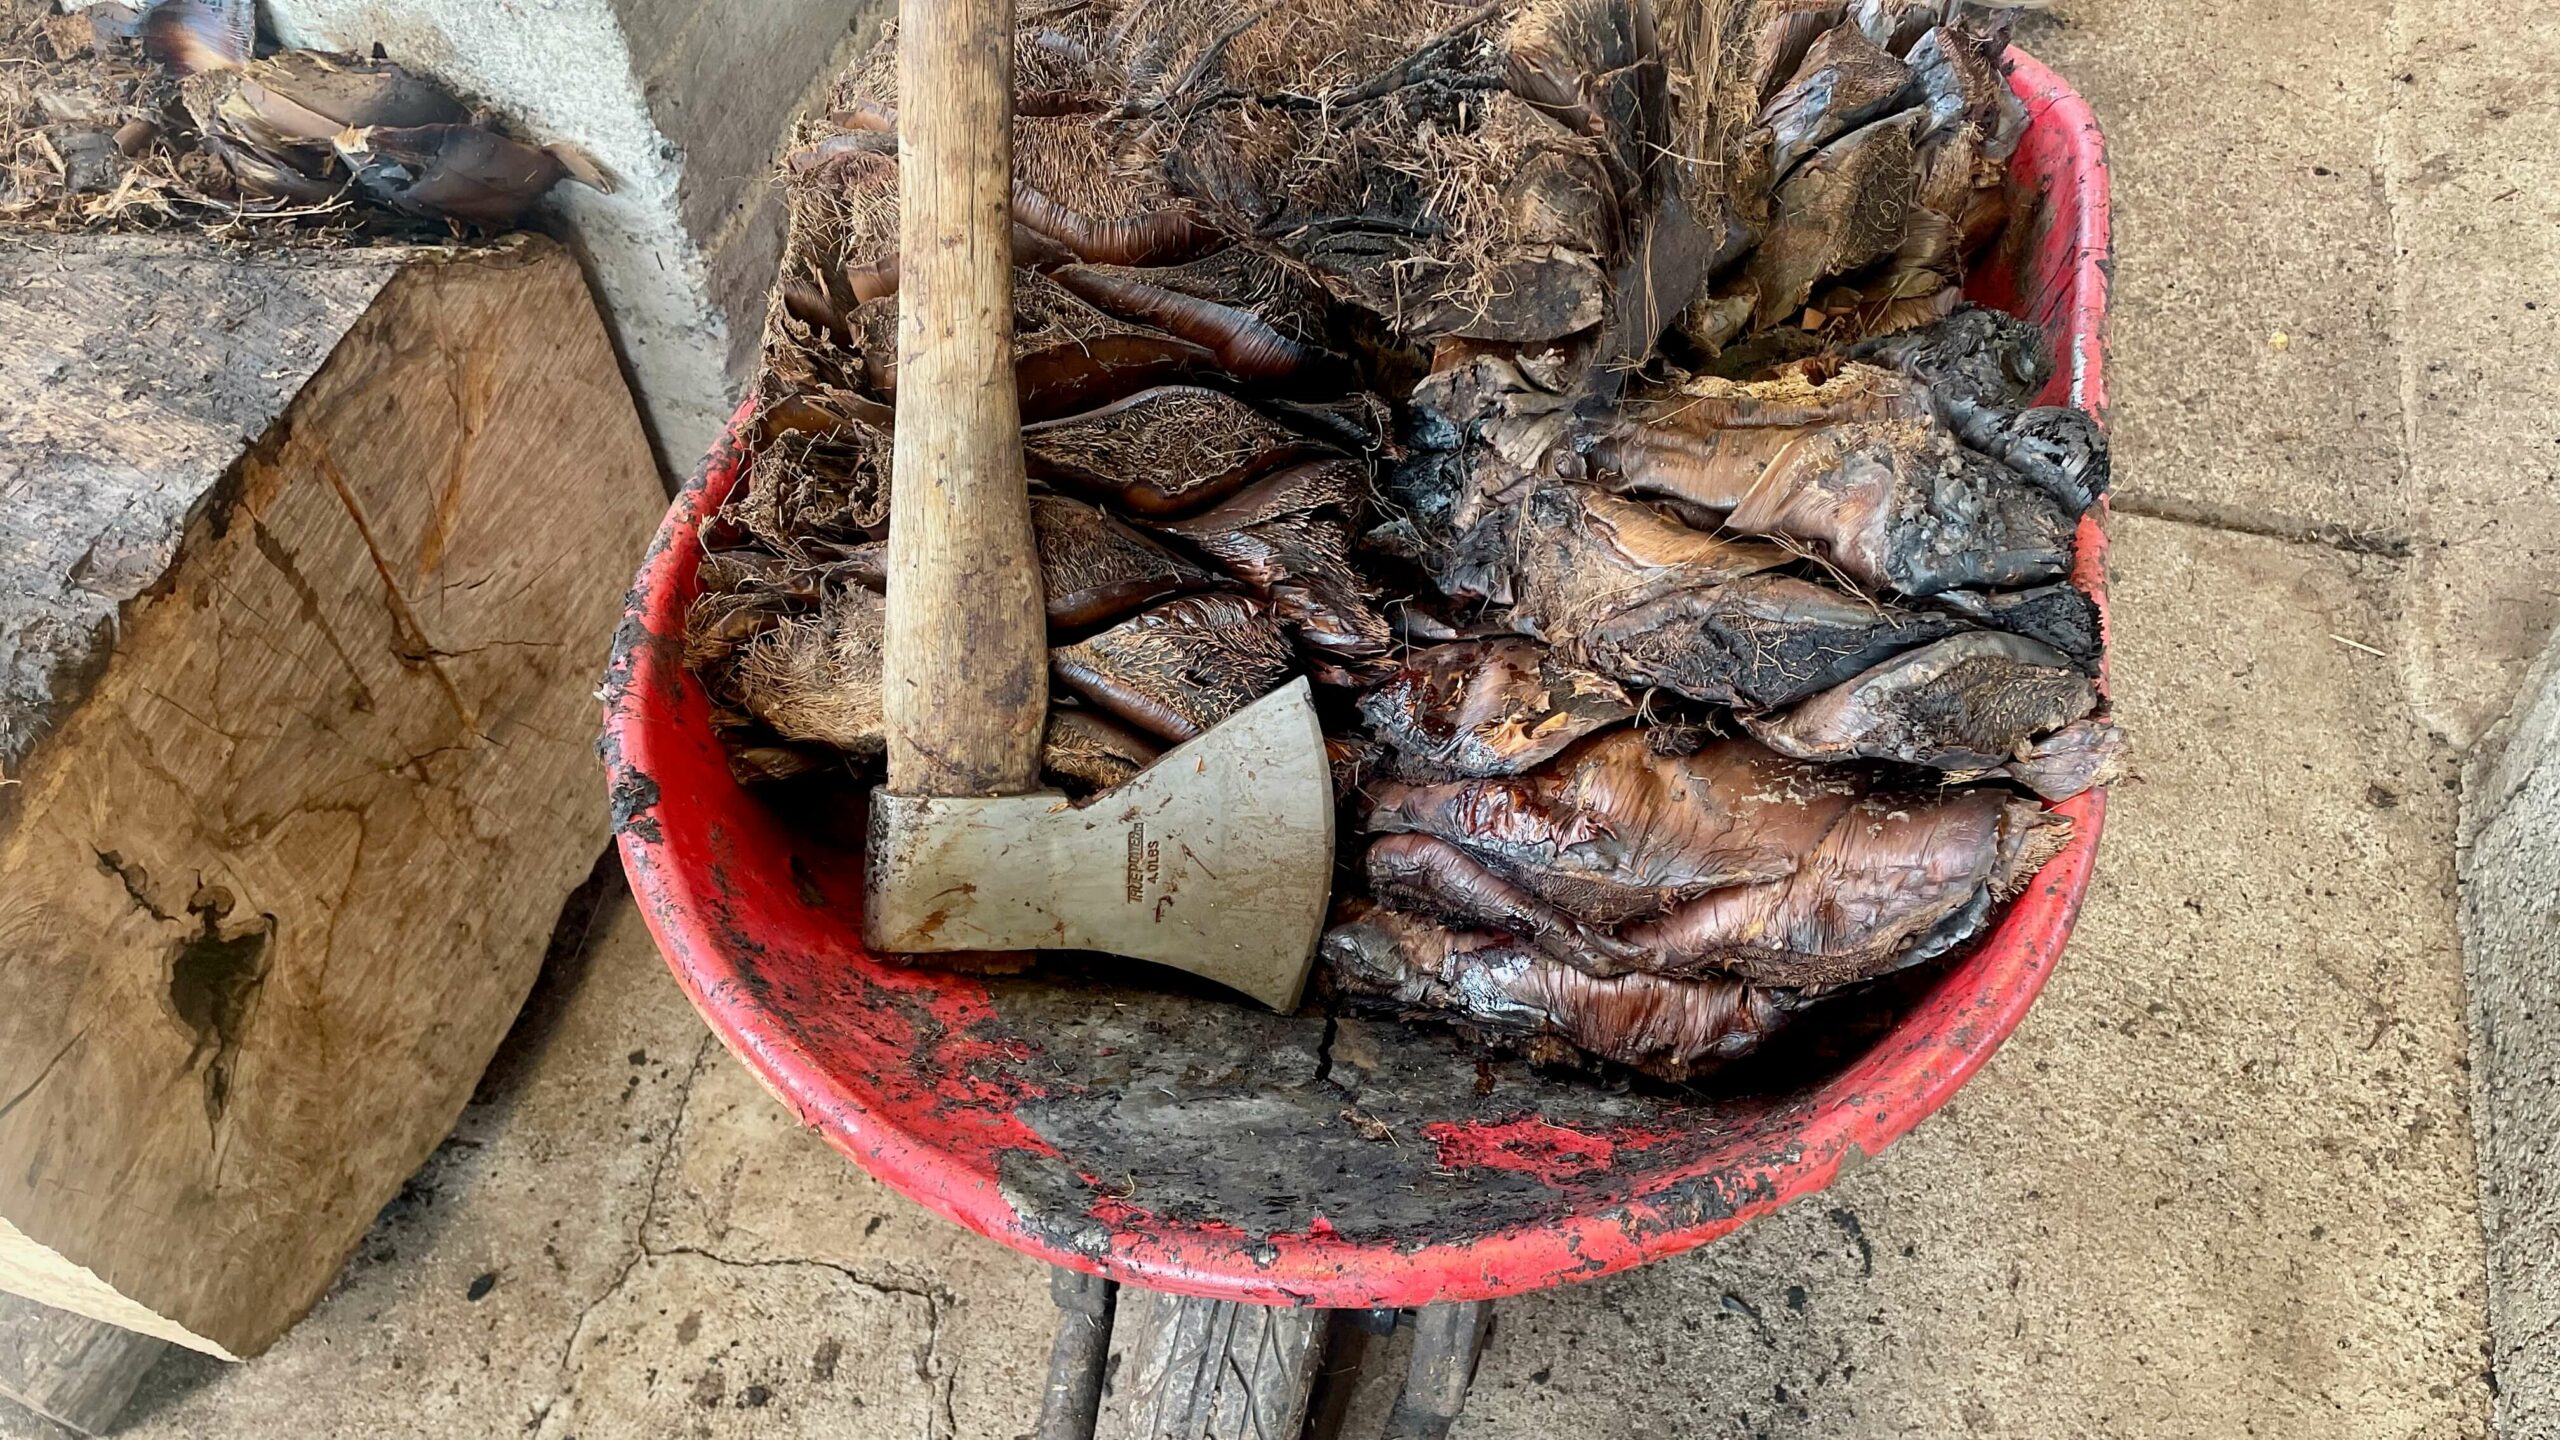 Cooked agave in a wheelbarrow with an axe laying on it